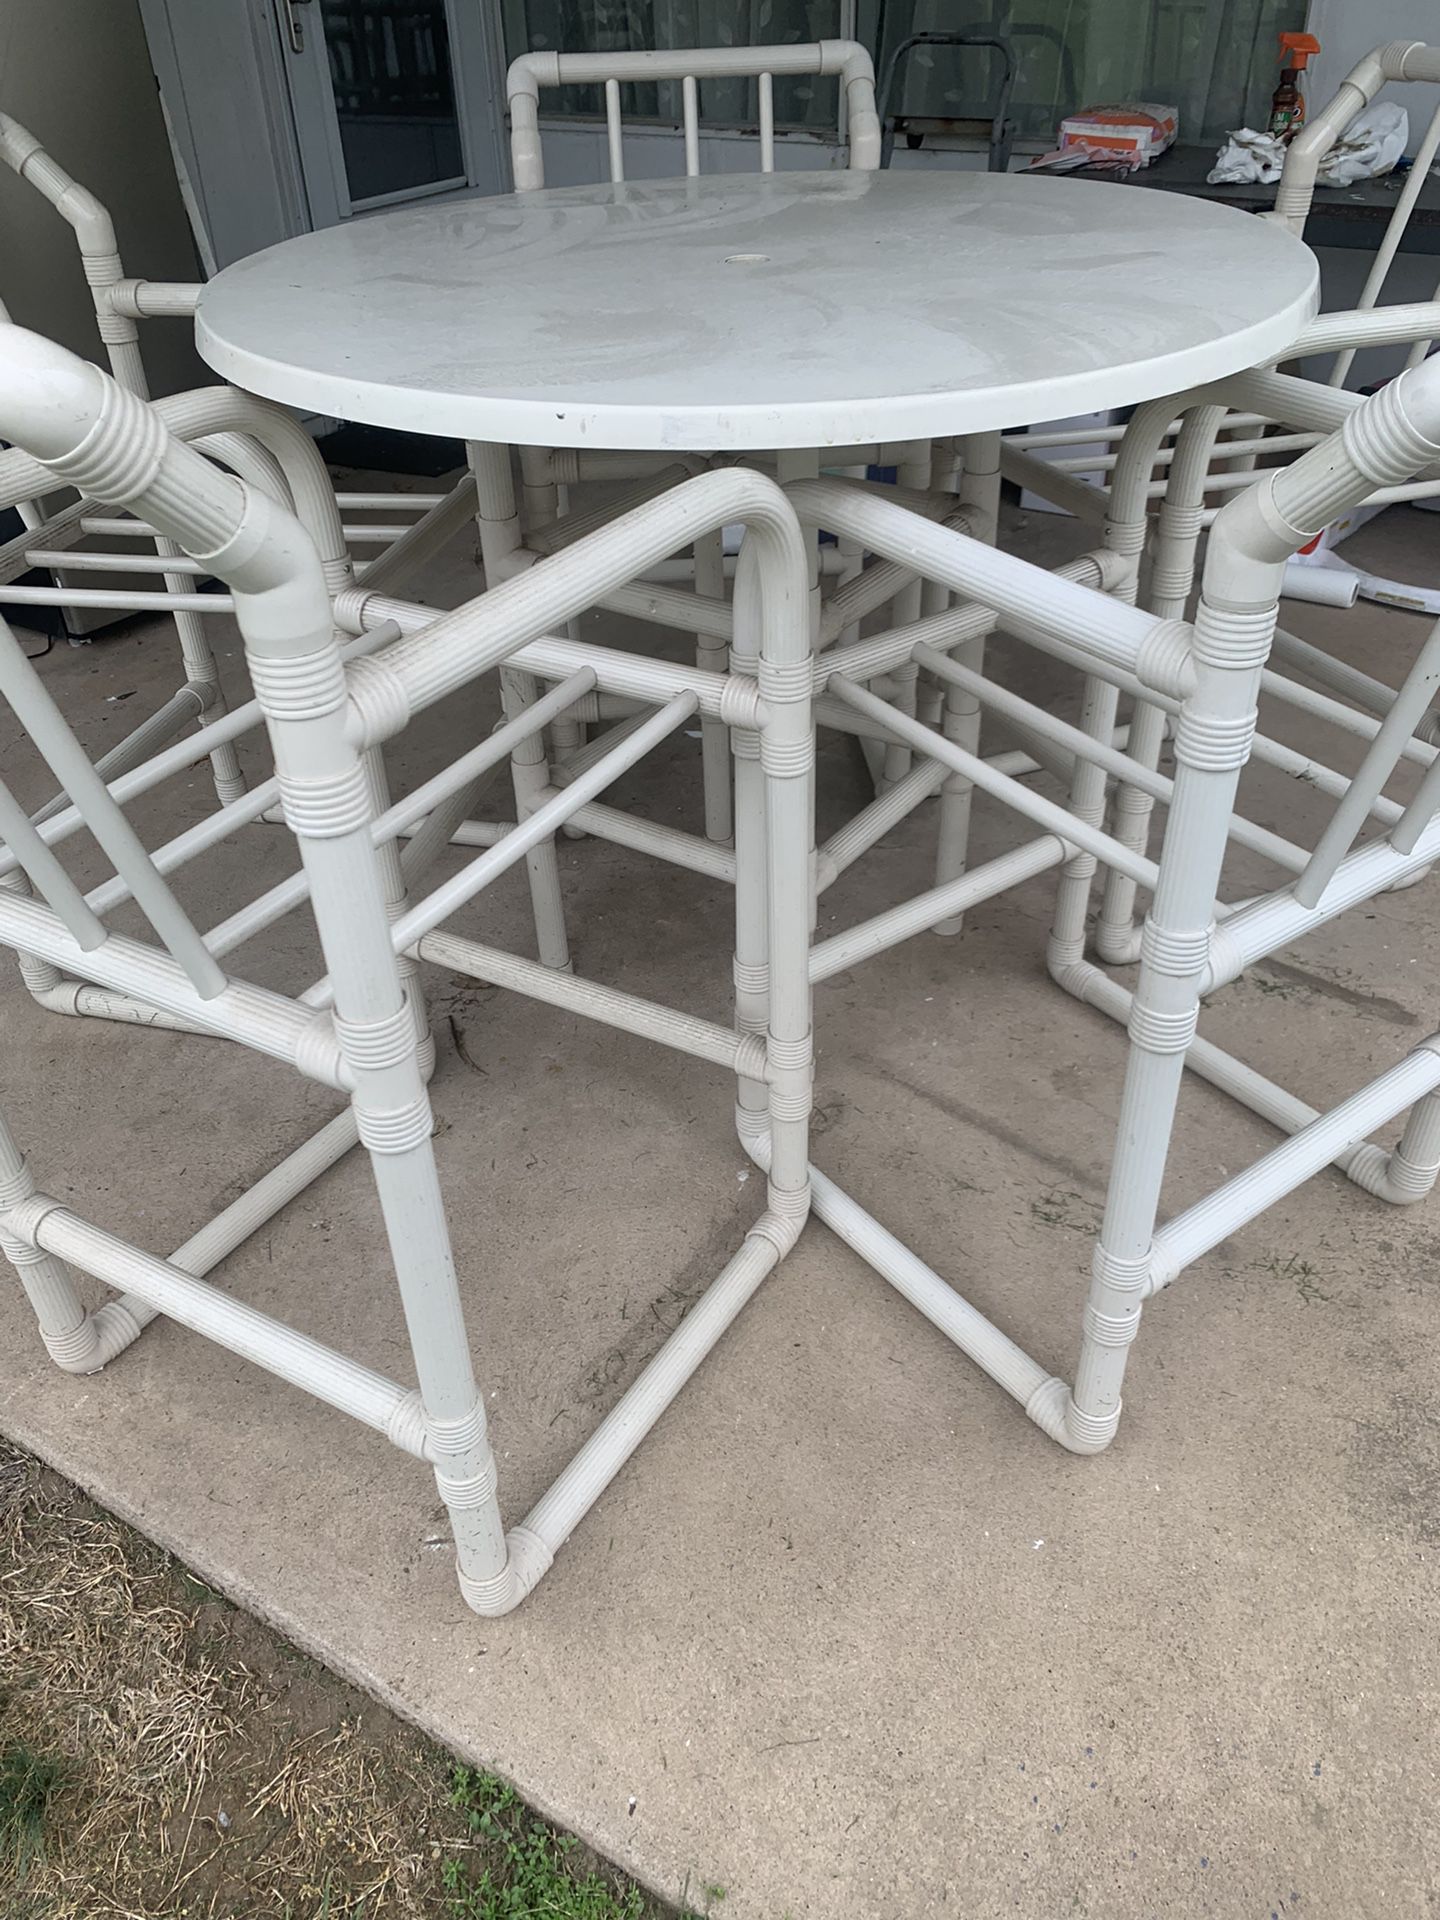  outdoor pvc pub table and five pvc chairs 